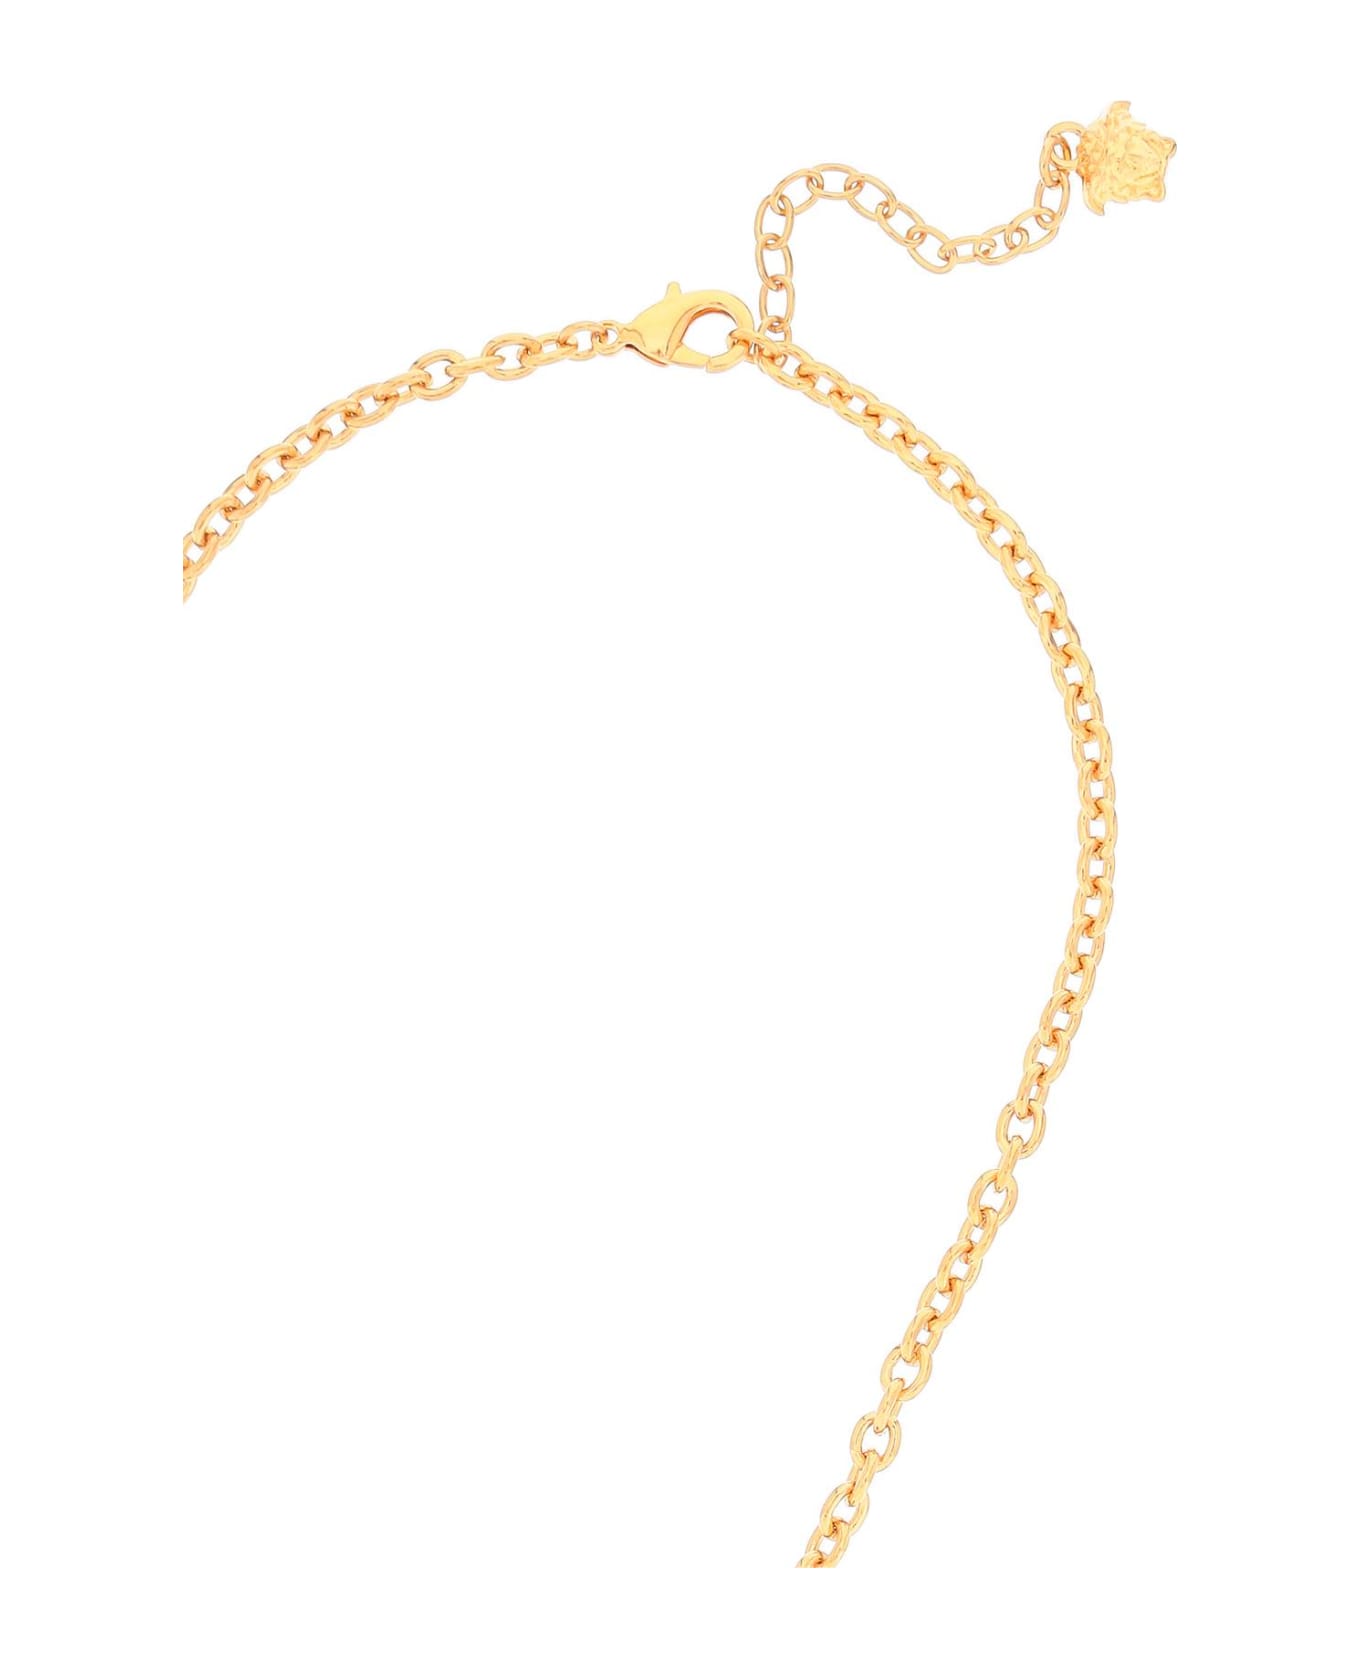 Versace La Medusa Necklace With Crystals - CRYSTAL VERSACE GOLD (Gold) ネックレス